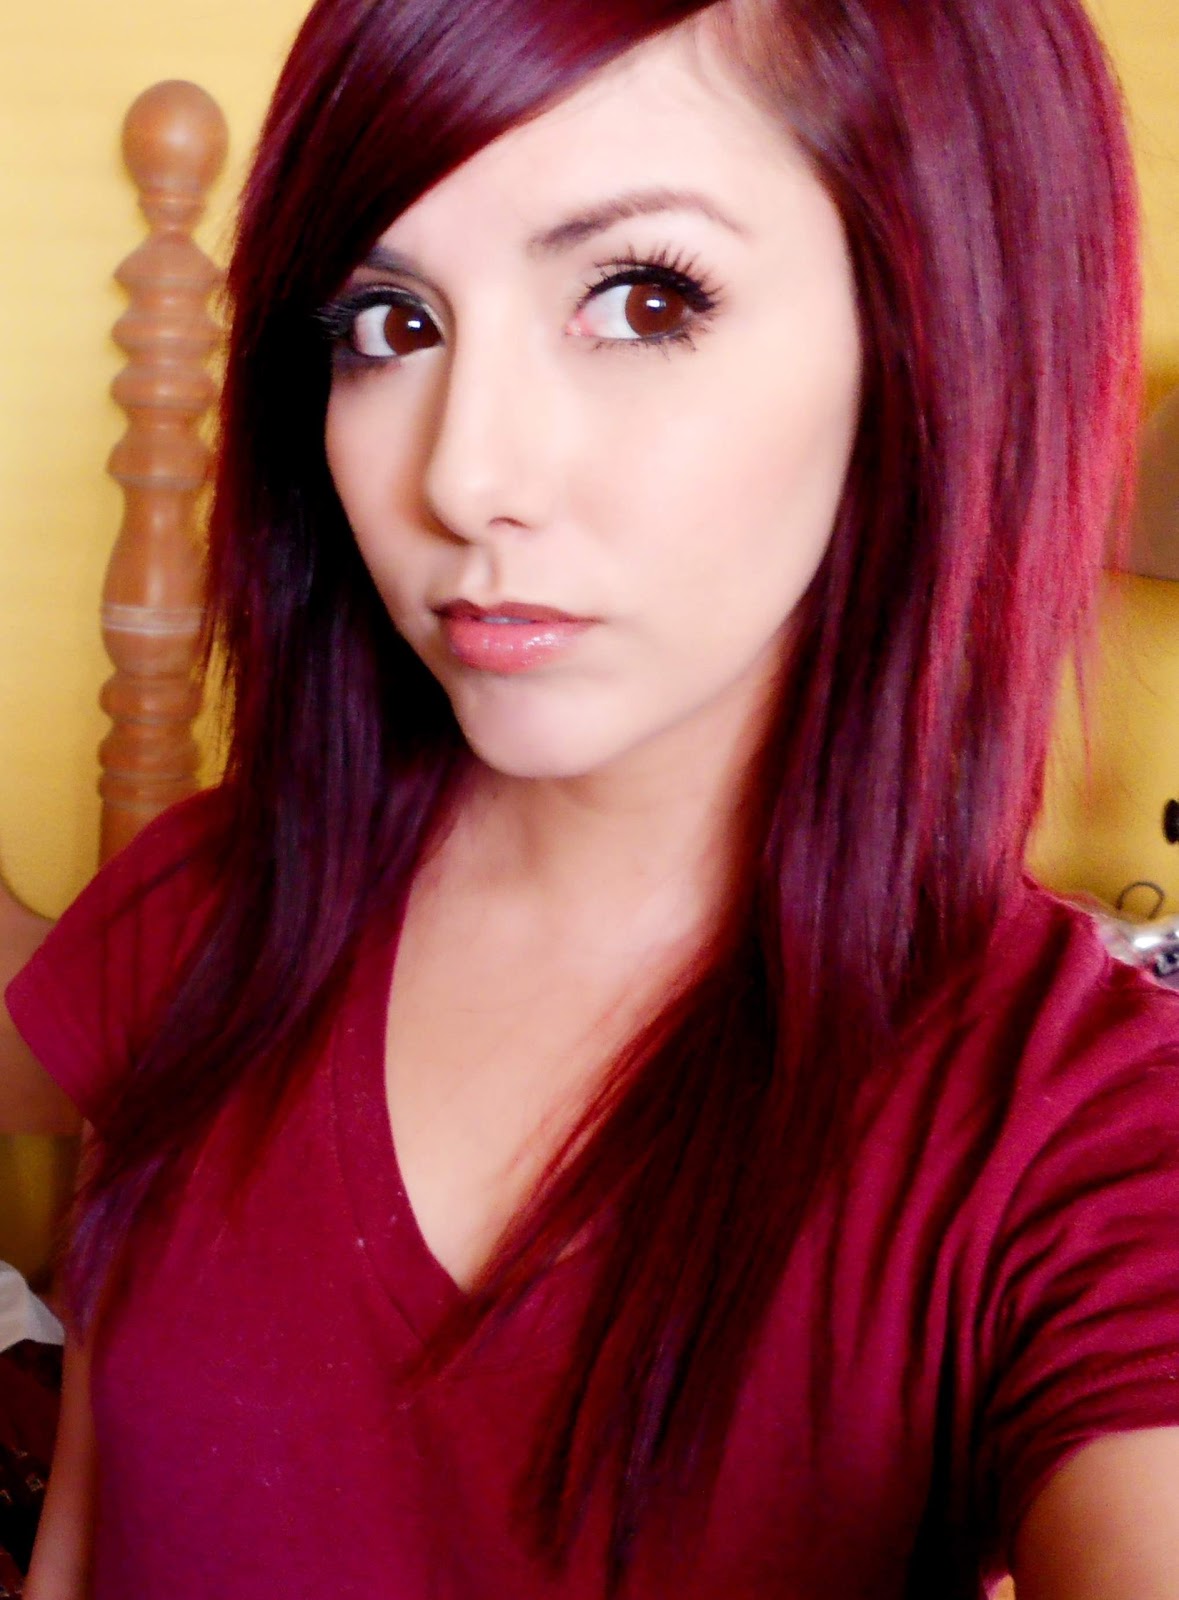 Technicolor: My Hair Color  How To Get Dark Red Hair!!